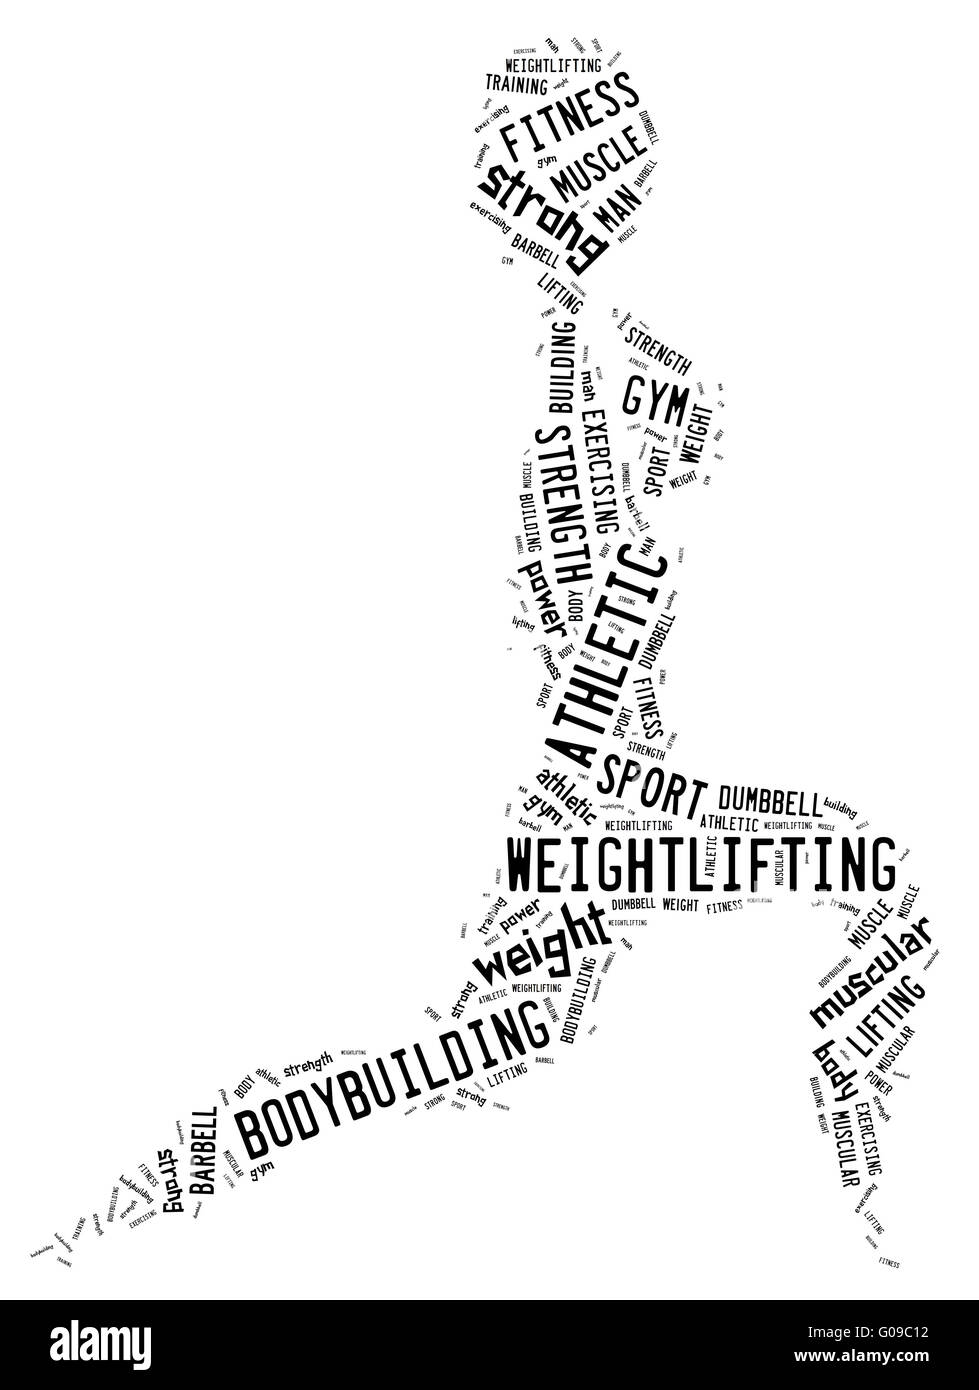 weighlifting pictogram with black wordings Stock Photo